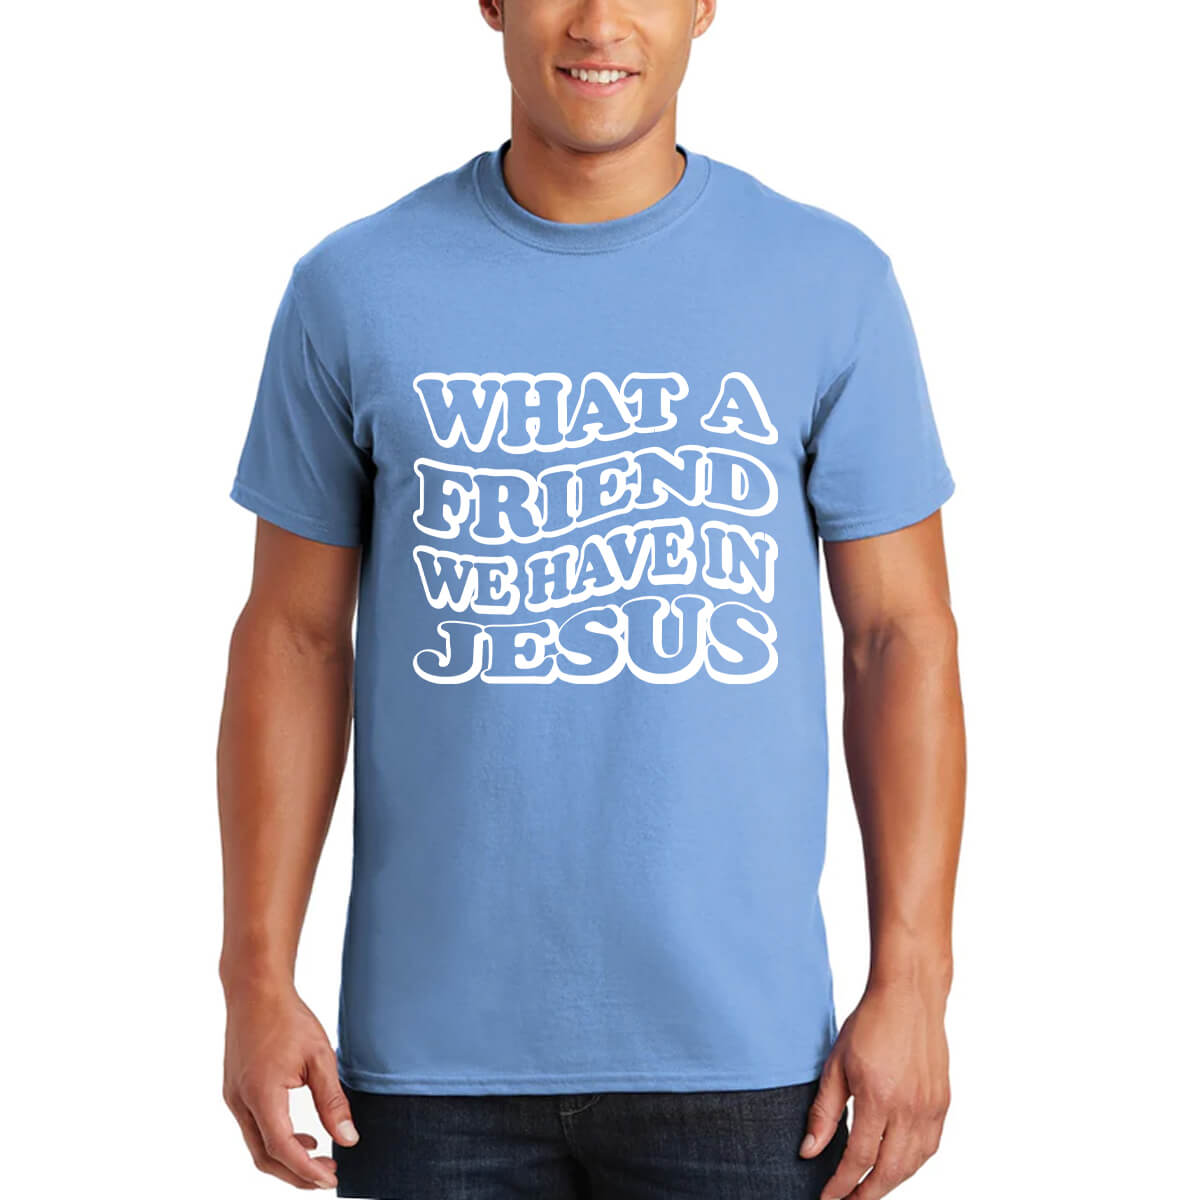 What A Friend We Have In Jesus Men's T-Shirt